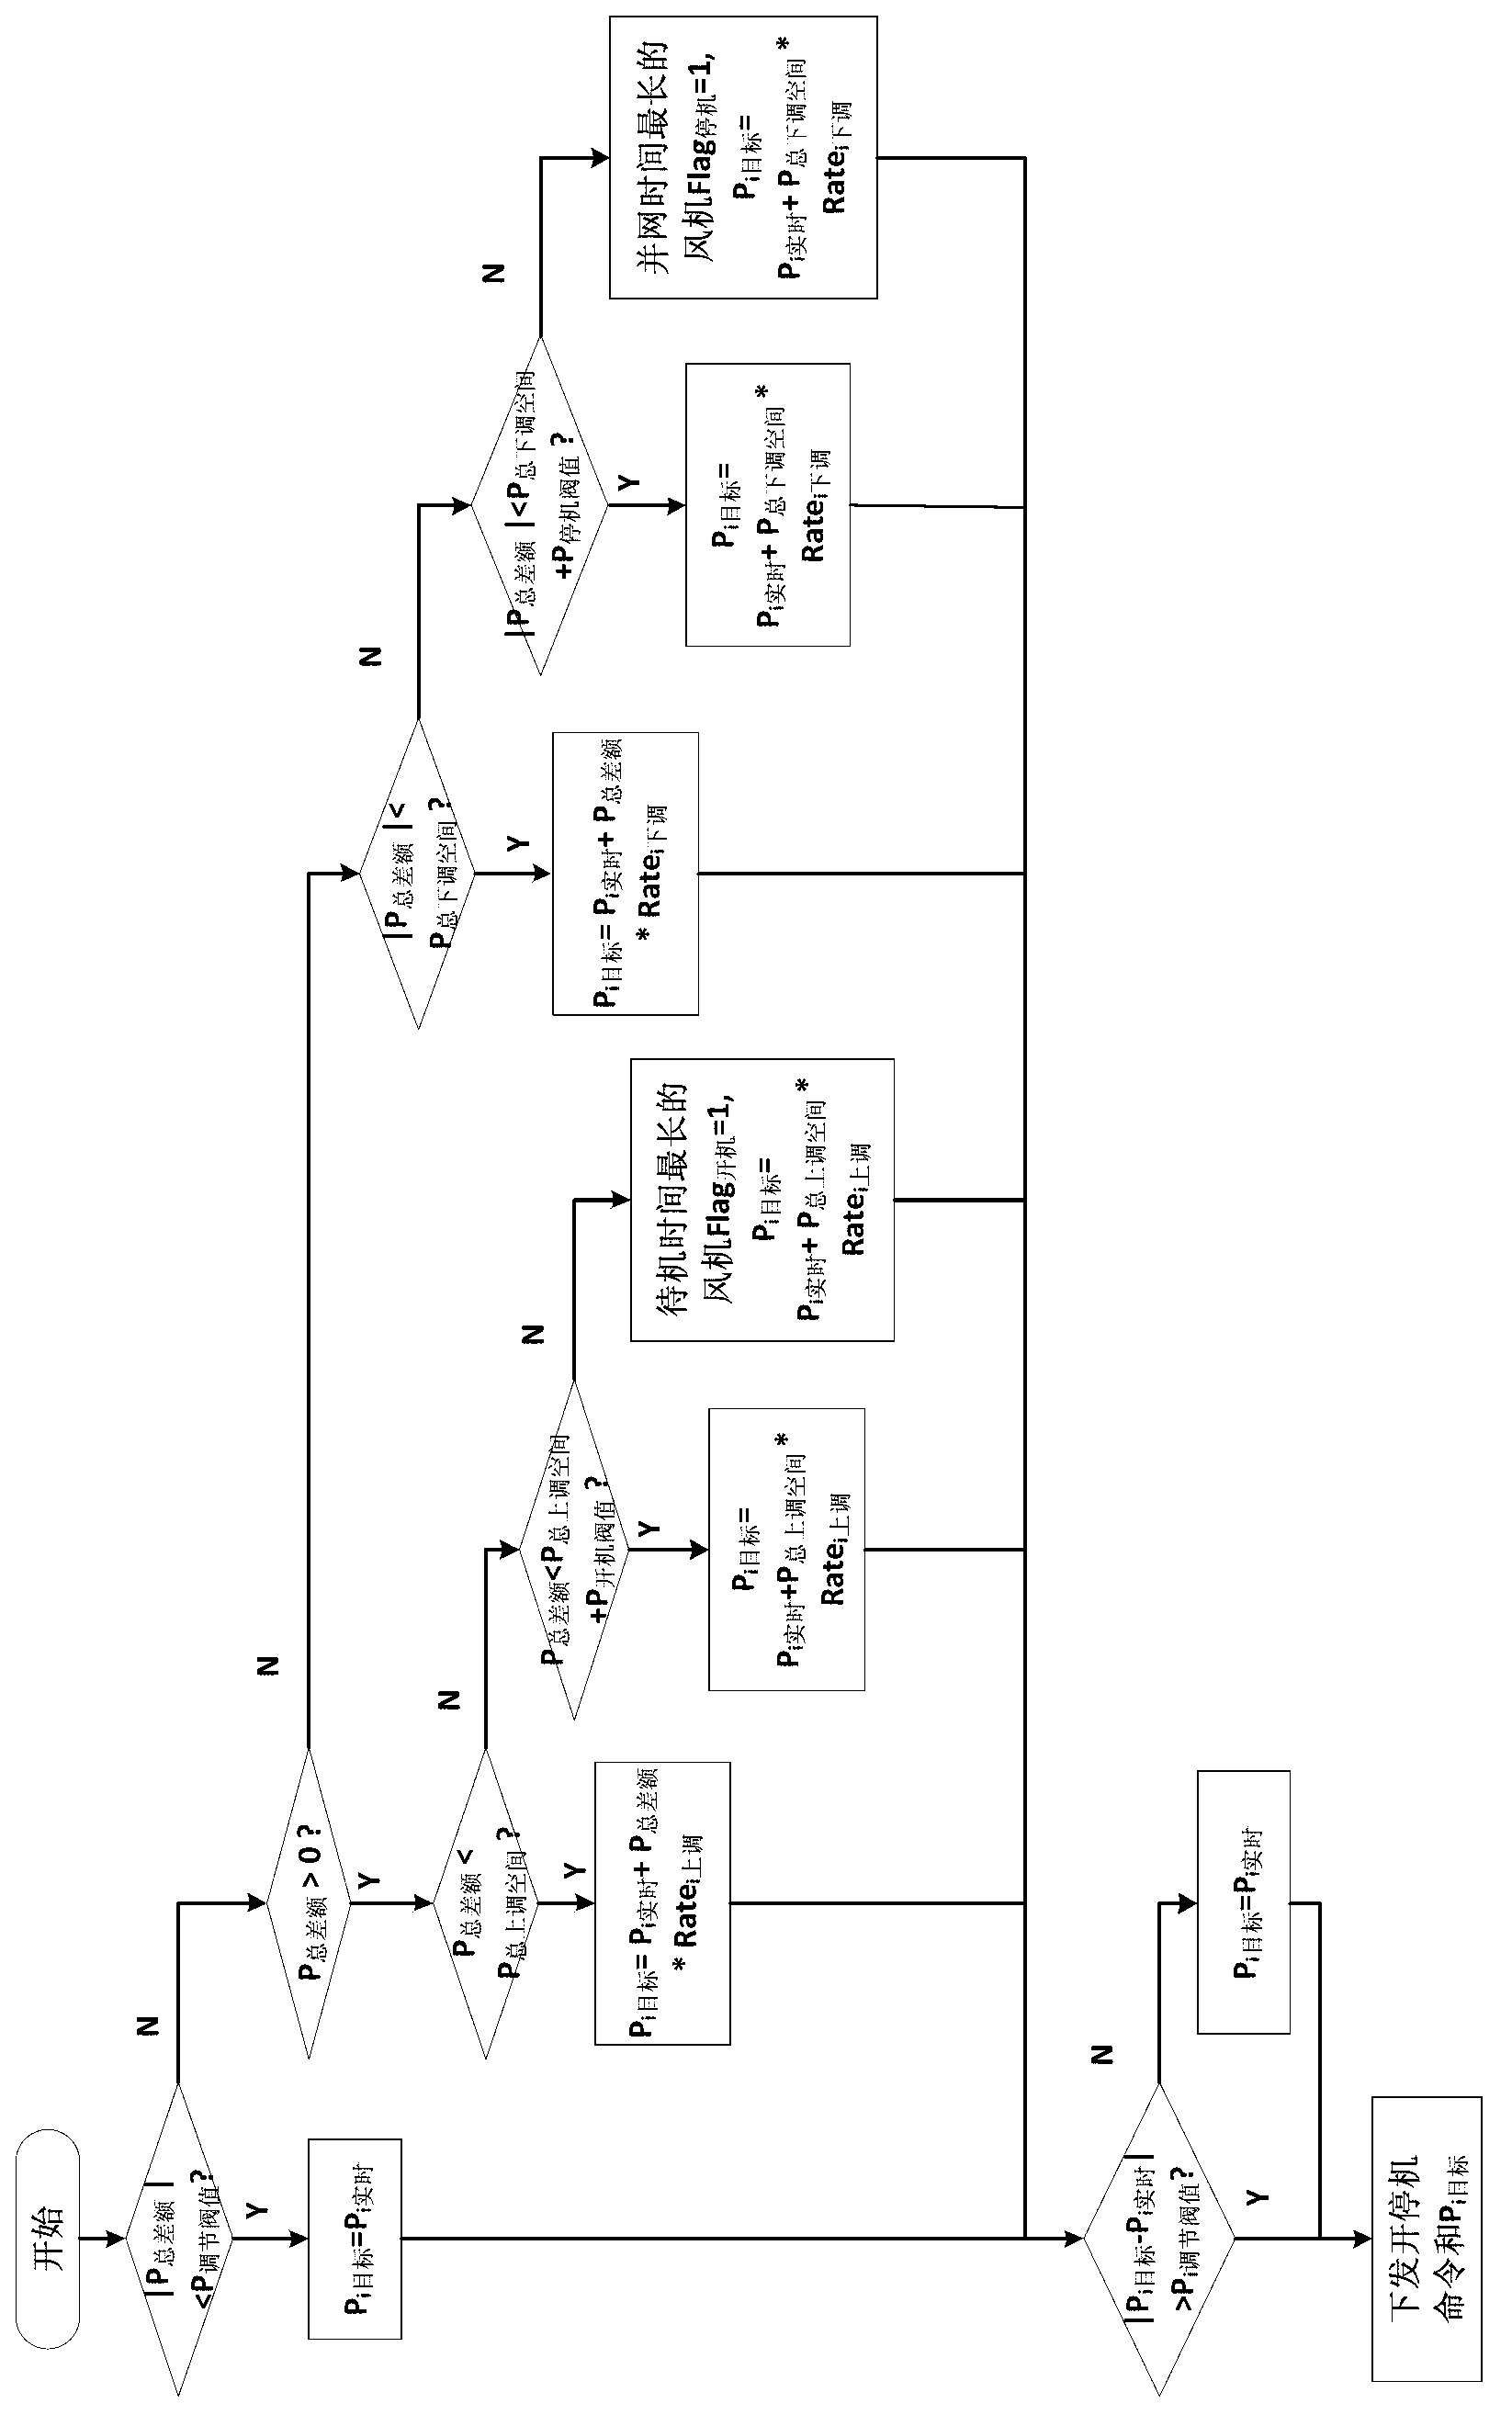 Active/reactive power control system of intelligent wind power station